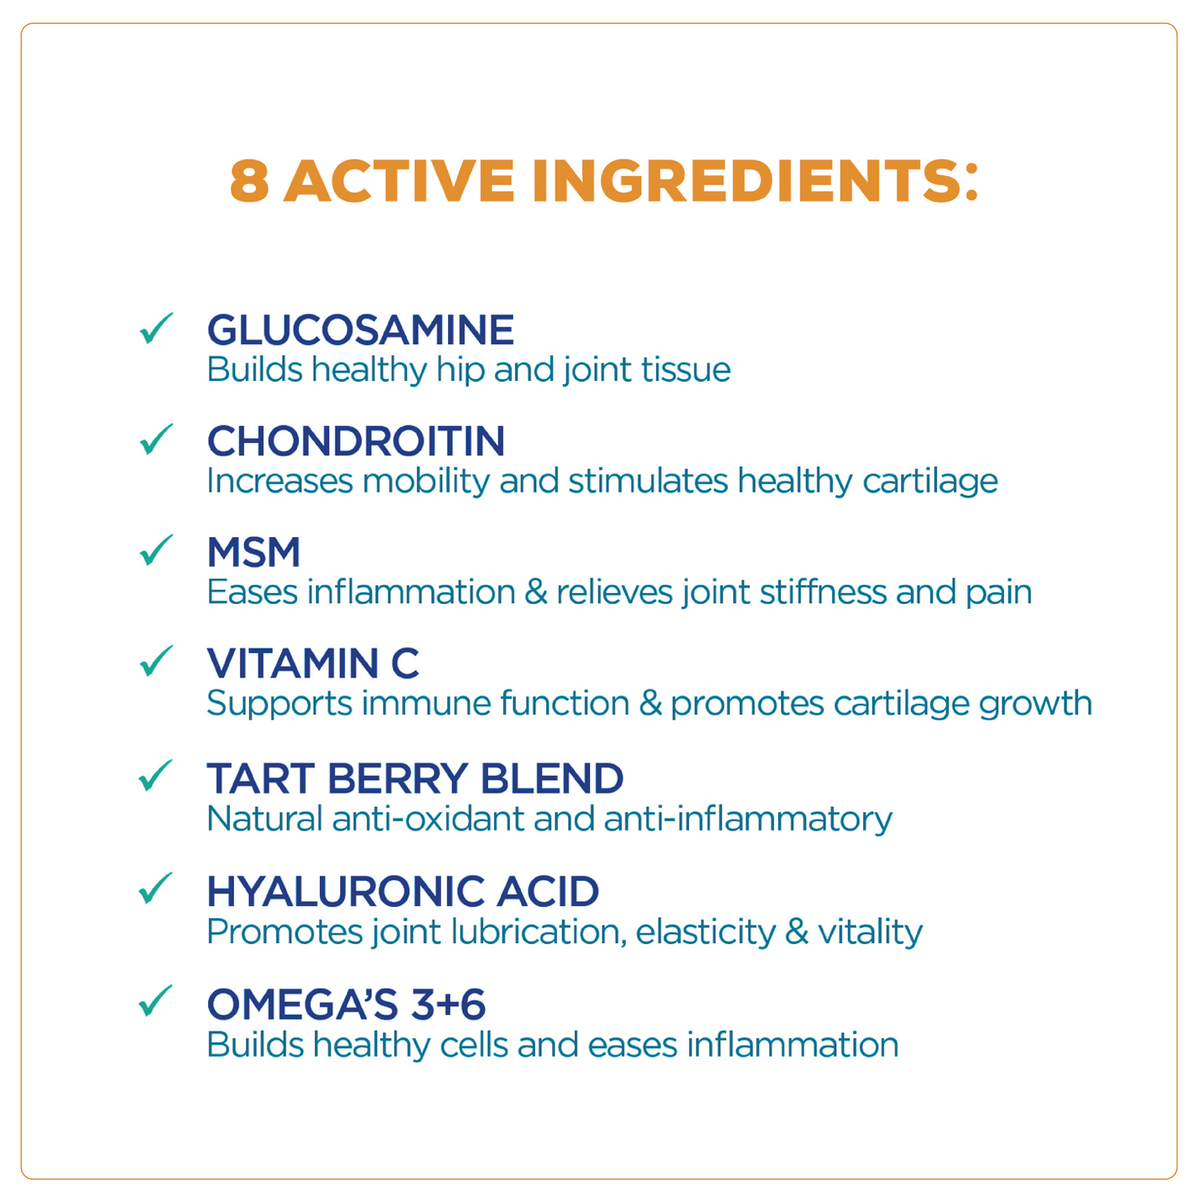 WagWorthy Naturals contains 8 active ingredients to improve dog joint health and mobility